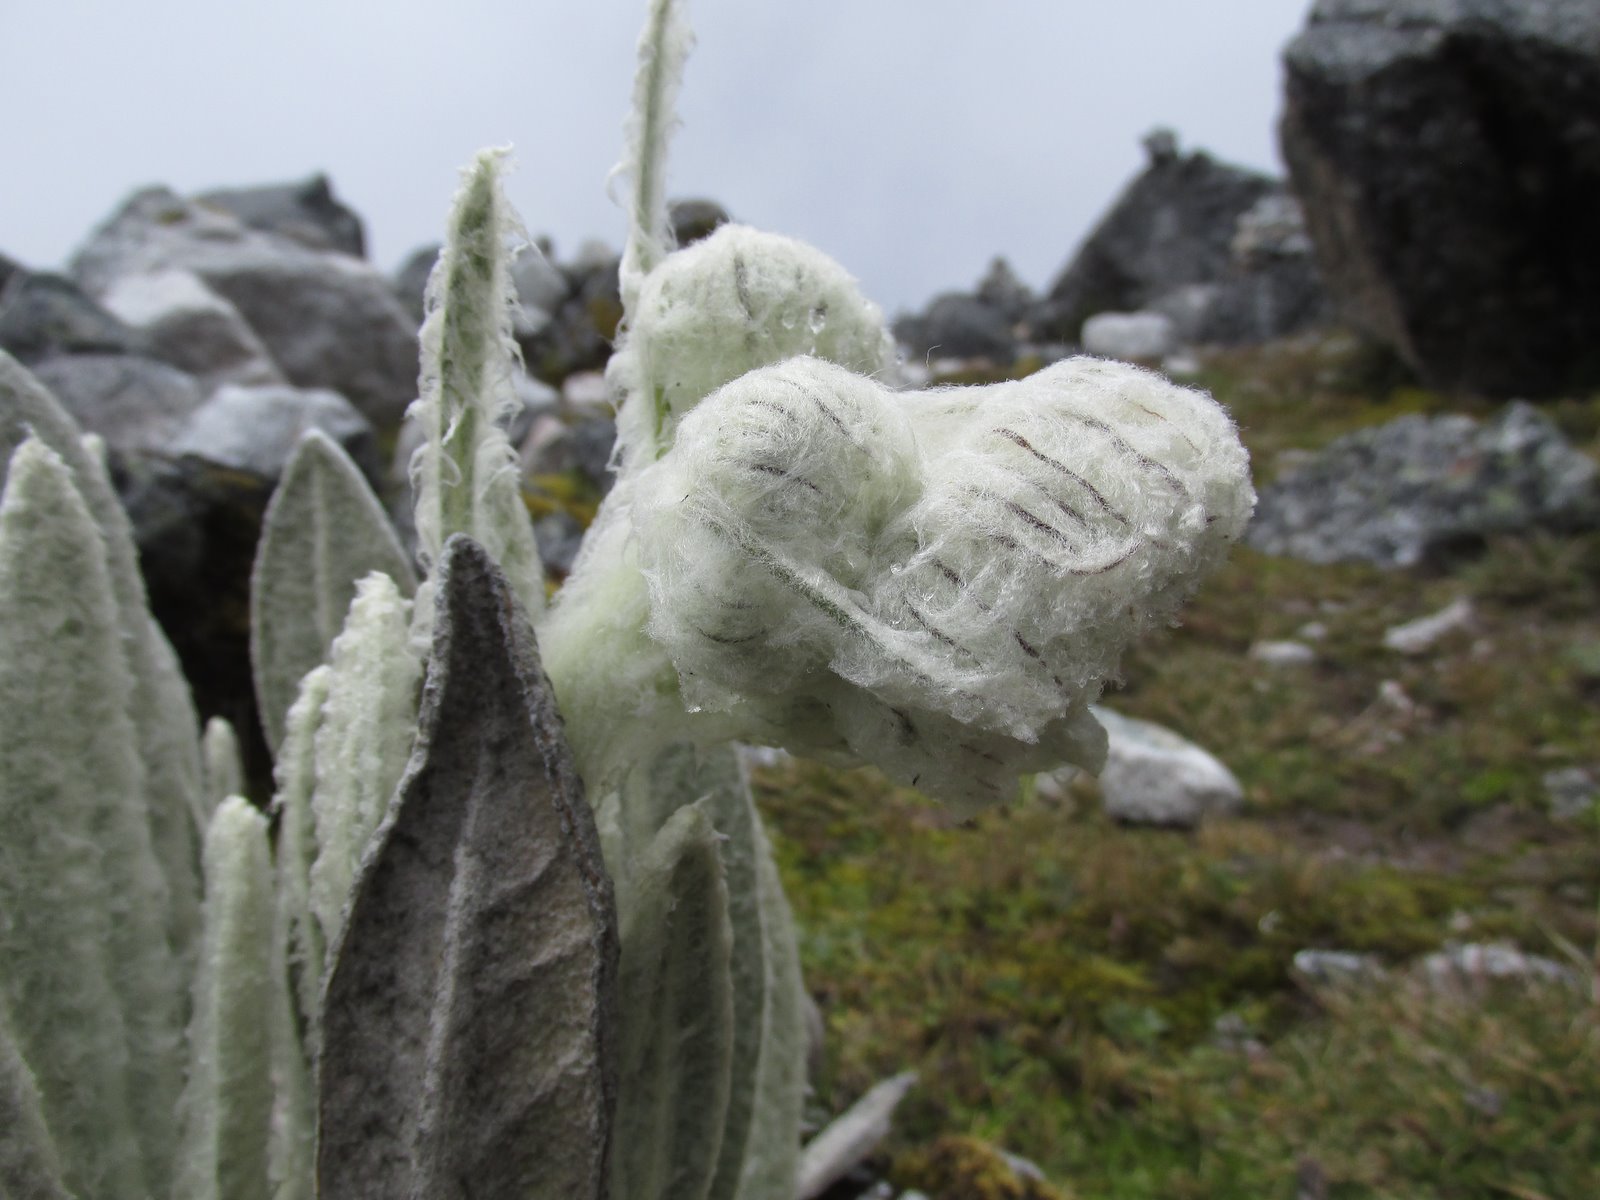 The white hairs protect the plant from freezing temperatures, harsh winds and precipitation.